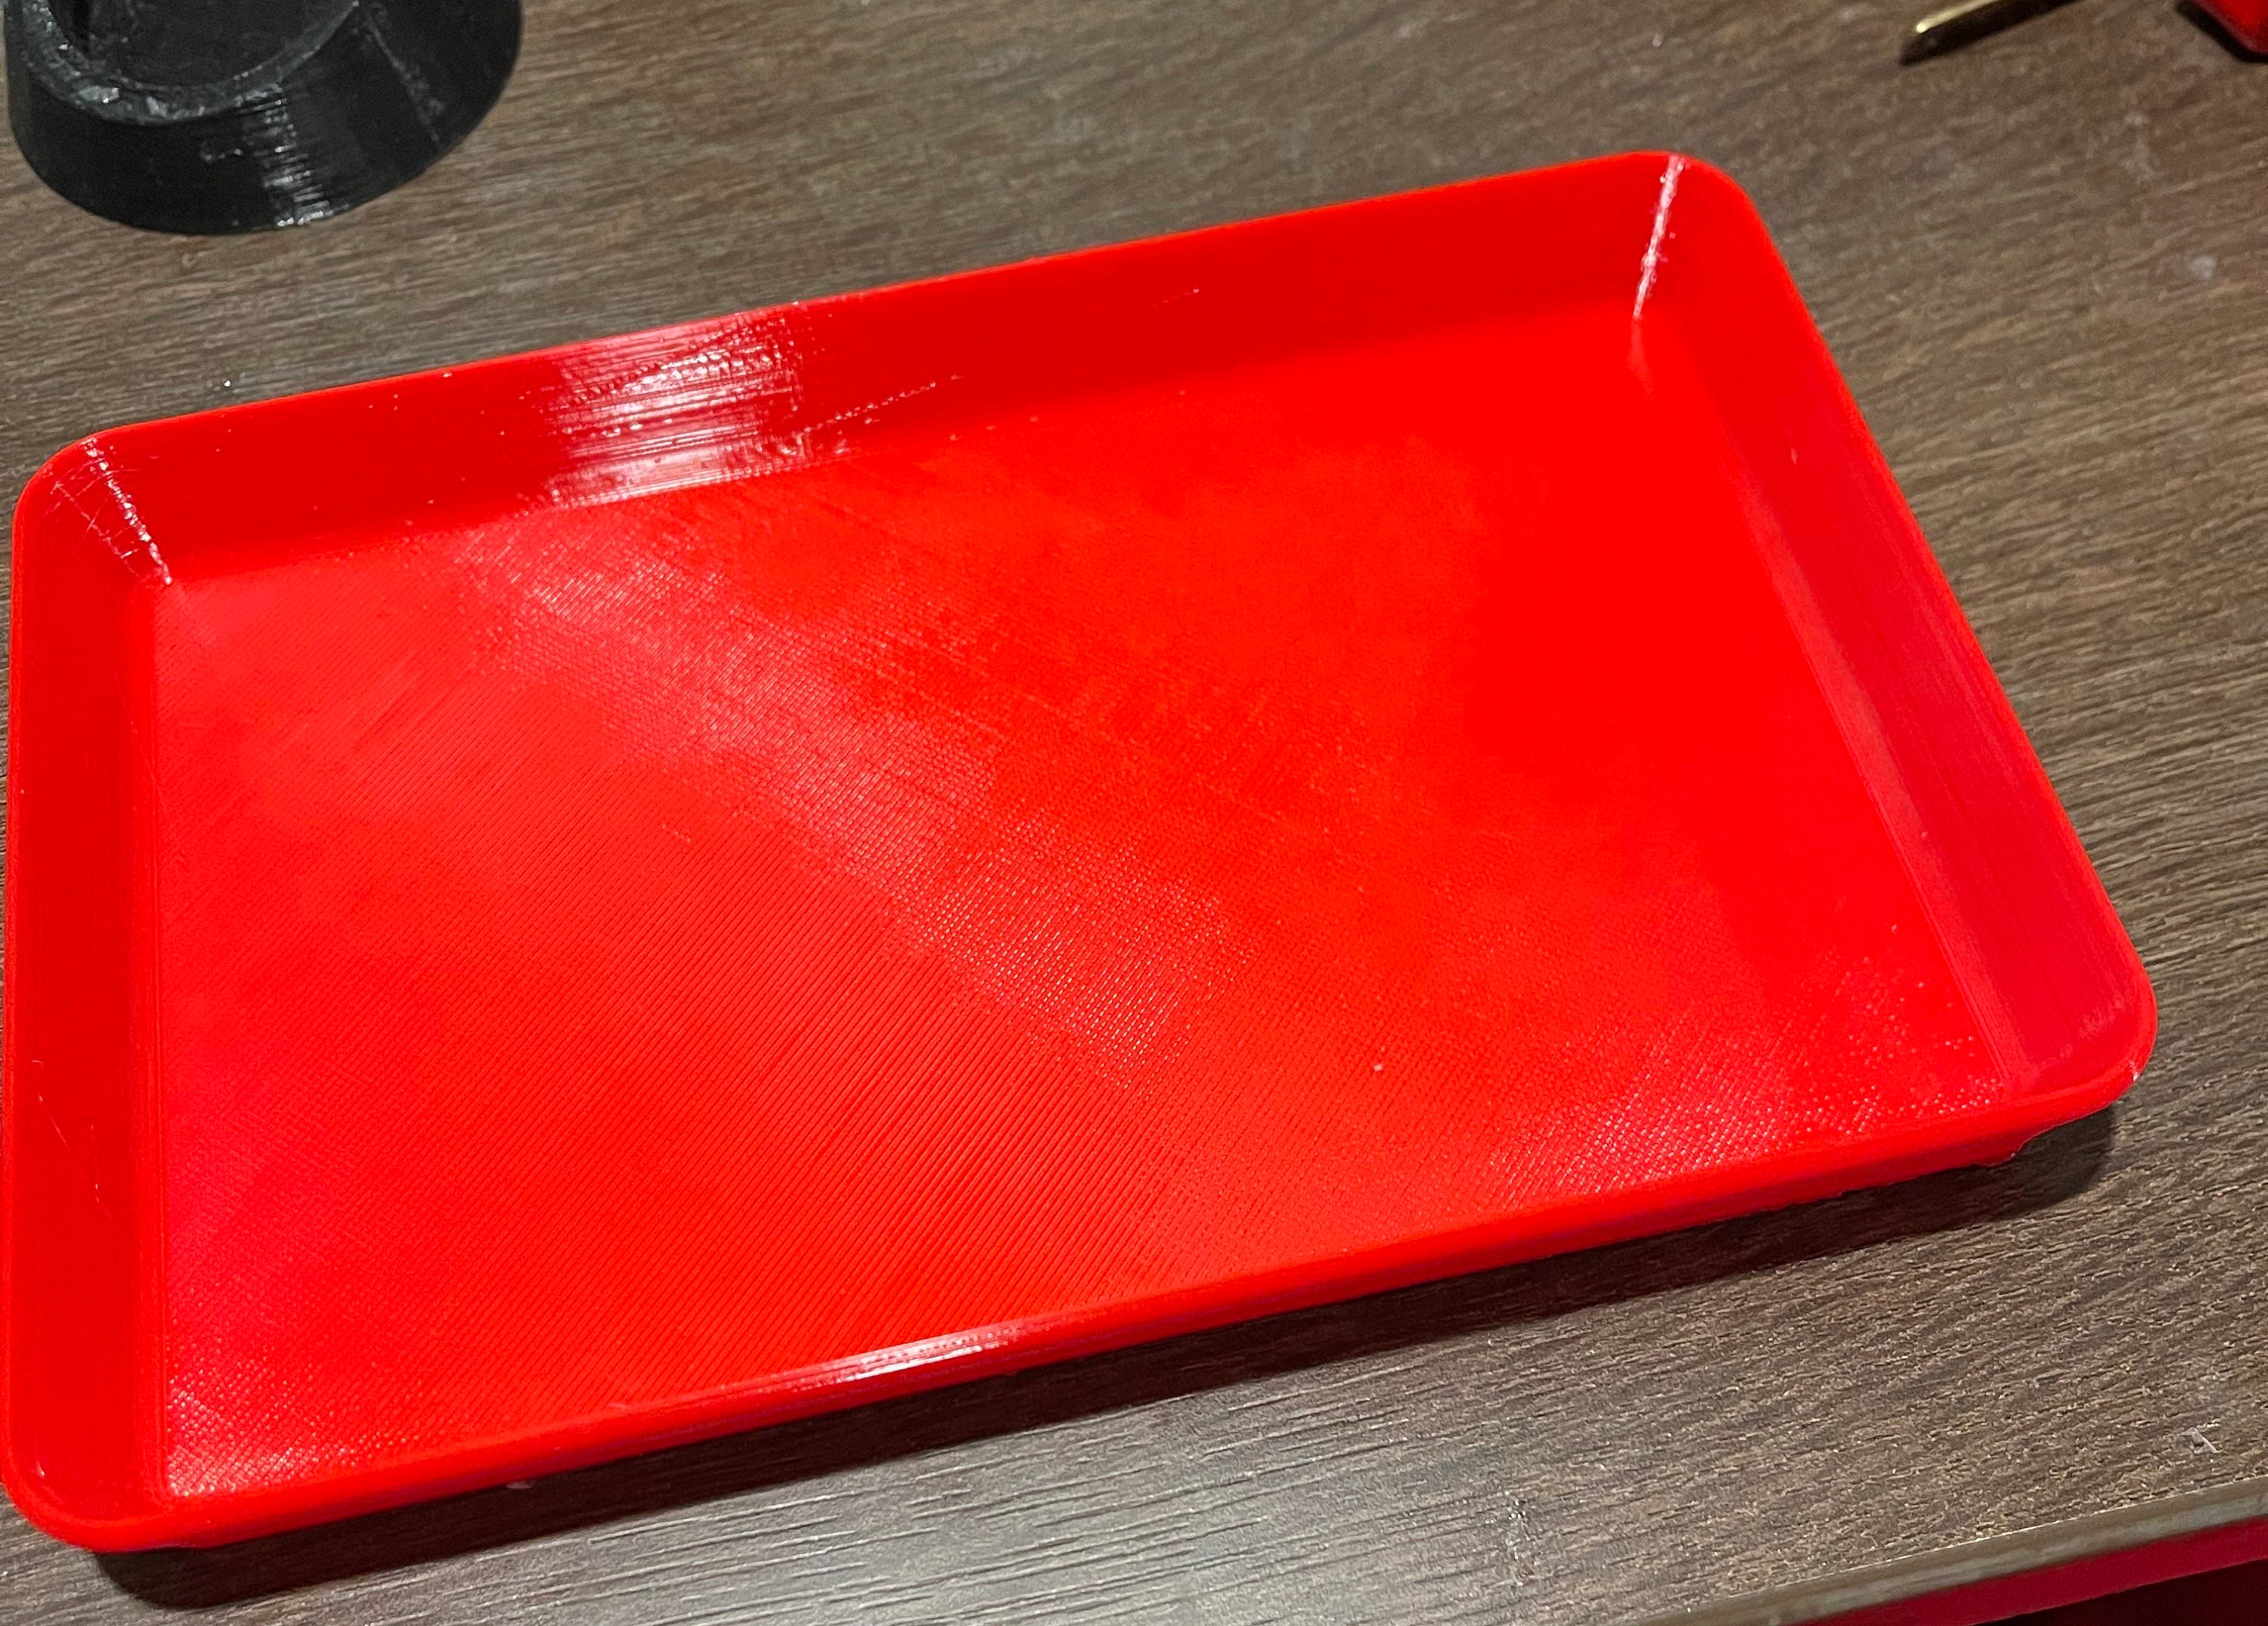 Yullmu Silicone Dab Mats for Wax 12X8.5 Inches Pad Wax Mat Metal Tray,  Portable Tray, Stylish Rolling Tray，1Mats+1Metal Tray - Buy Online -  487866295